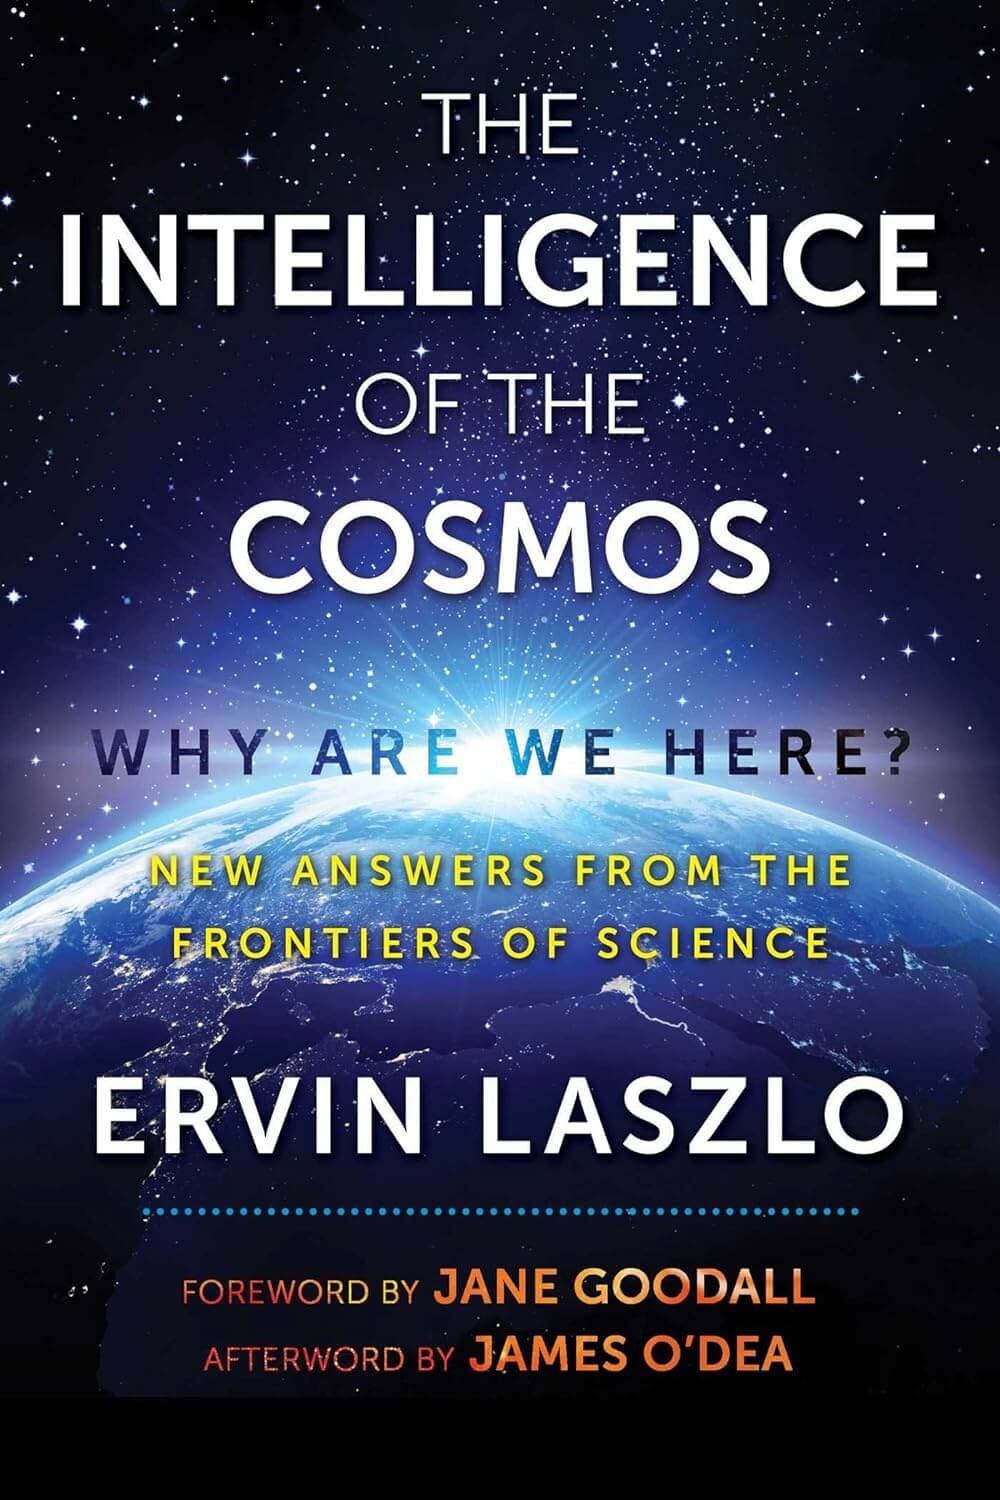 The Intelligence of the Cosmos, Ervin Laszlo